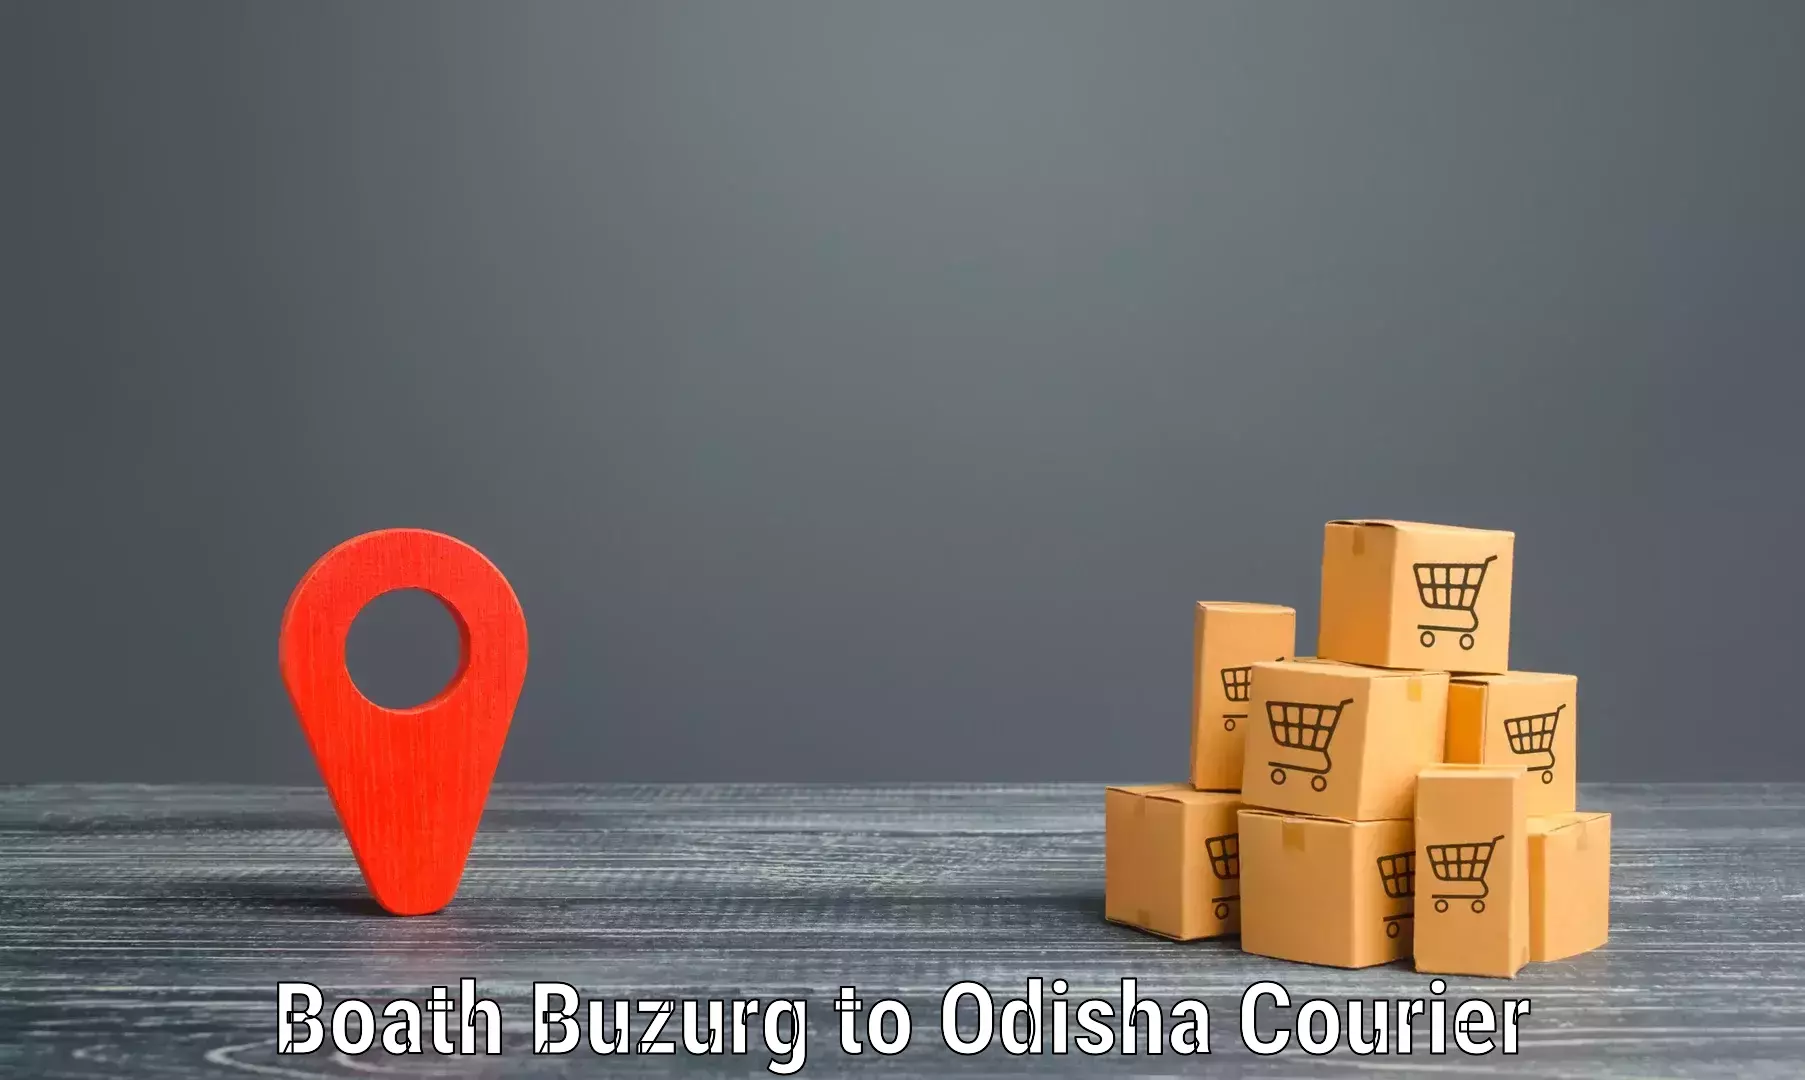 24/7 courier service Boath Buzurg to Bamra